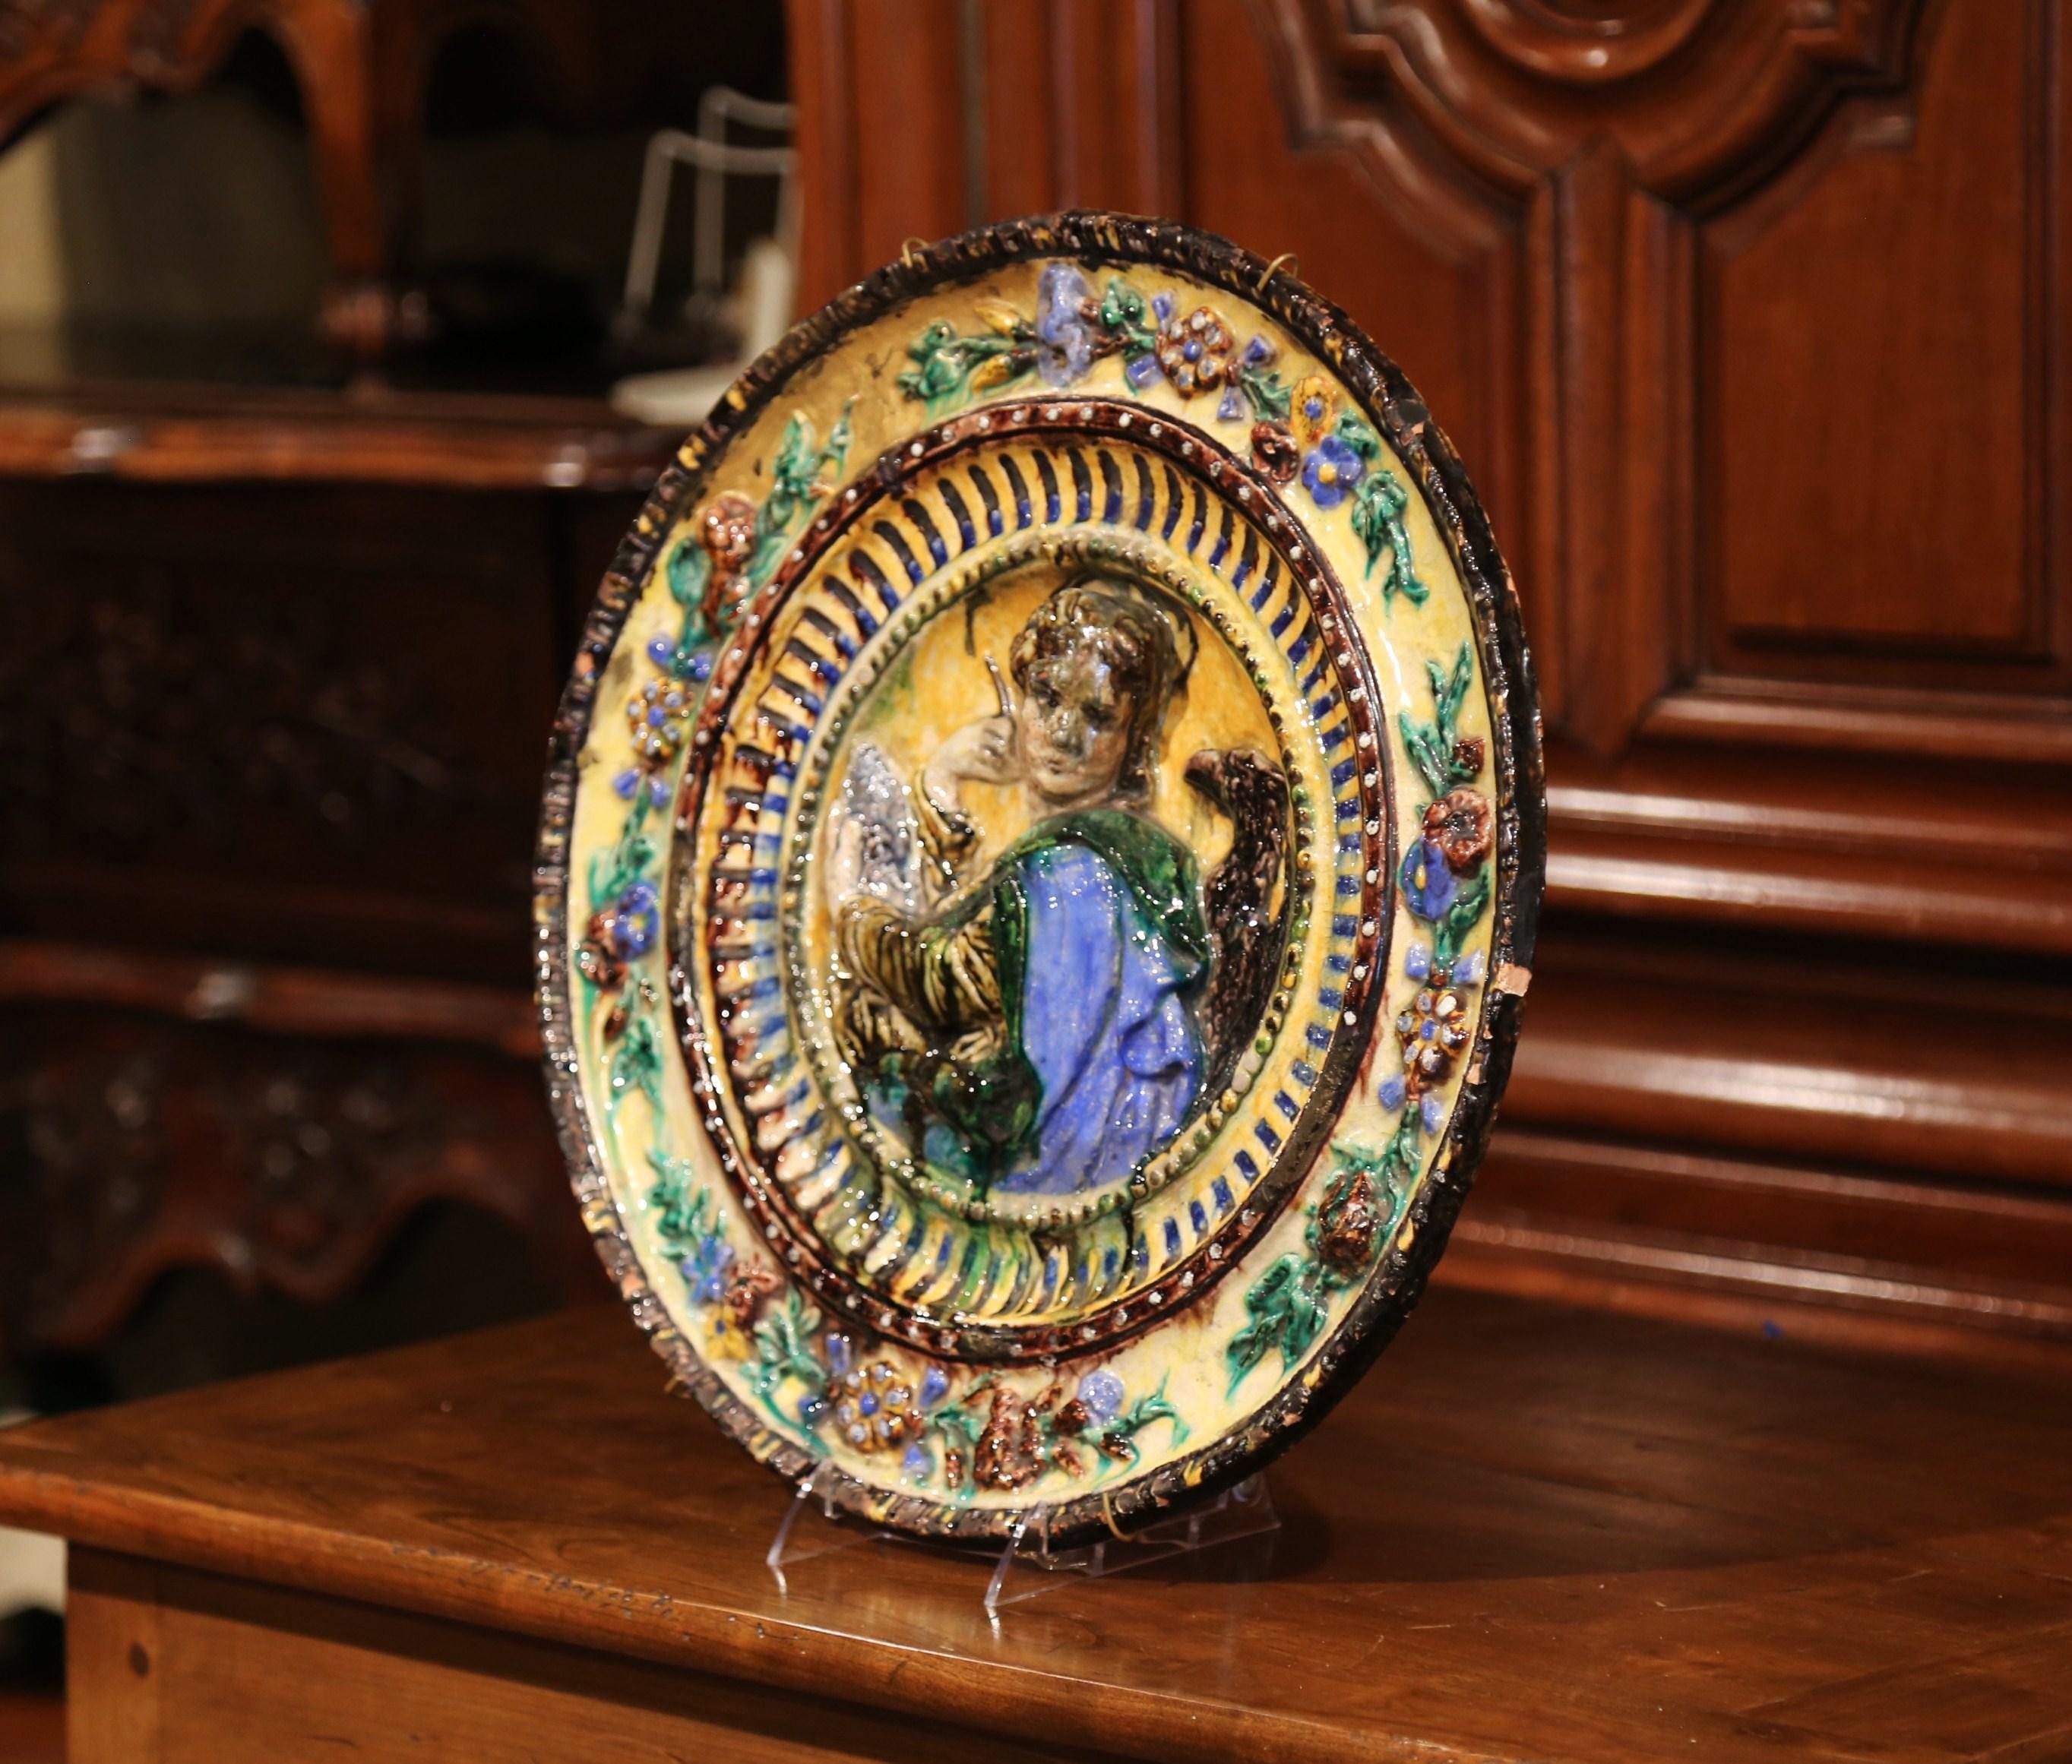 Decorate a wall with this antique and colorful barbotine platter; crafted in Italy, circa 1920, the large charger features Saint John the Evangelist holding a pen and writing a book, with an eagle standing on the side, symbolizing the elevation of